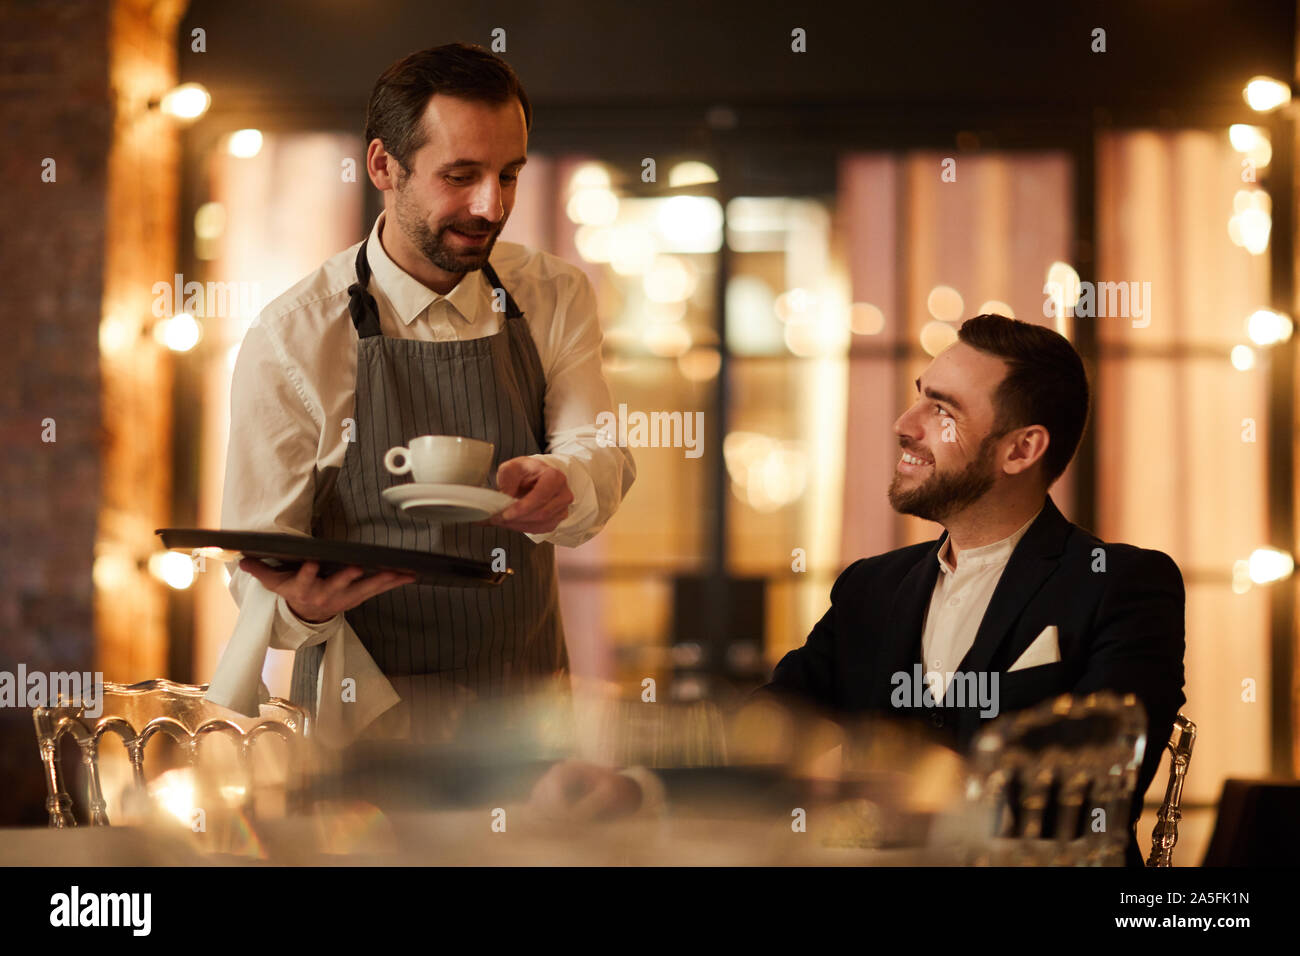 Side view portrait of handsome bearded businessman talking to waiter bringing coffee and smiling happily in luxury restaurant Stock Photo